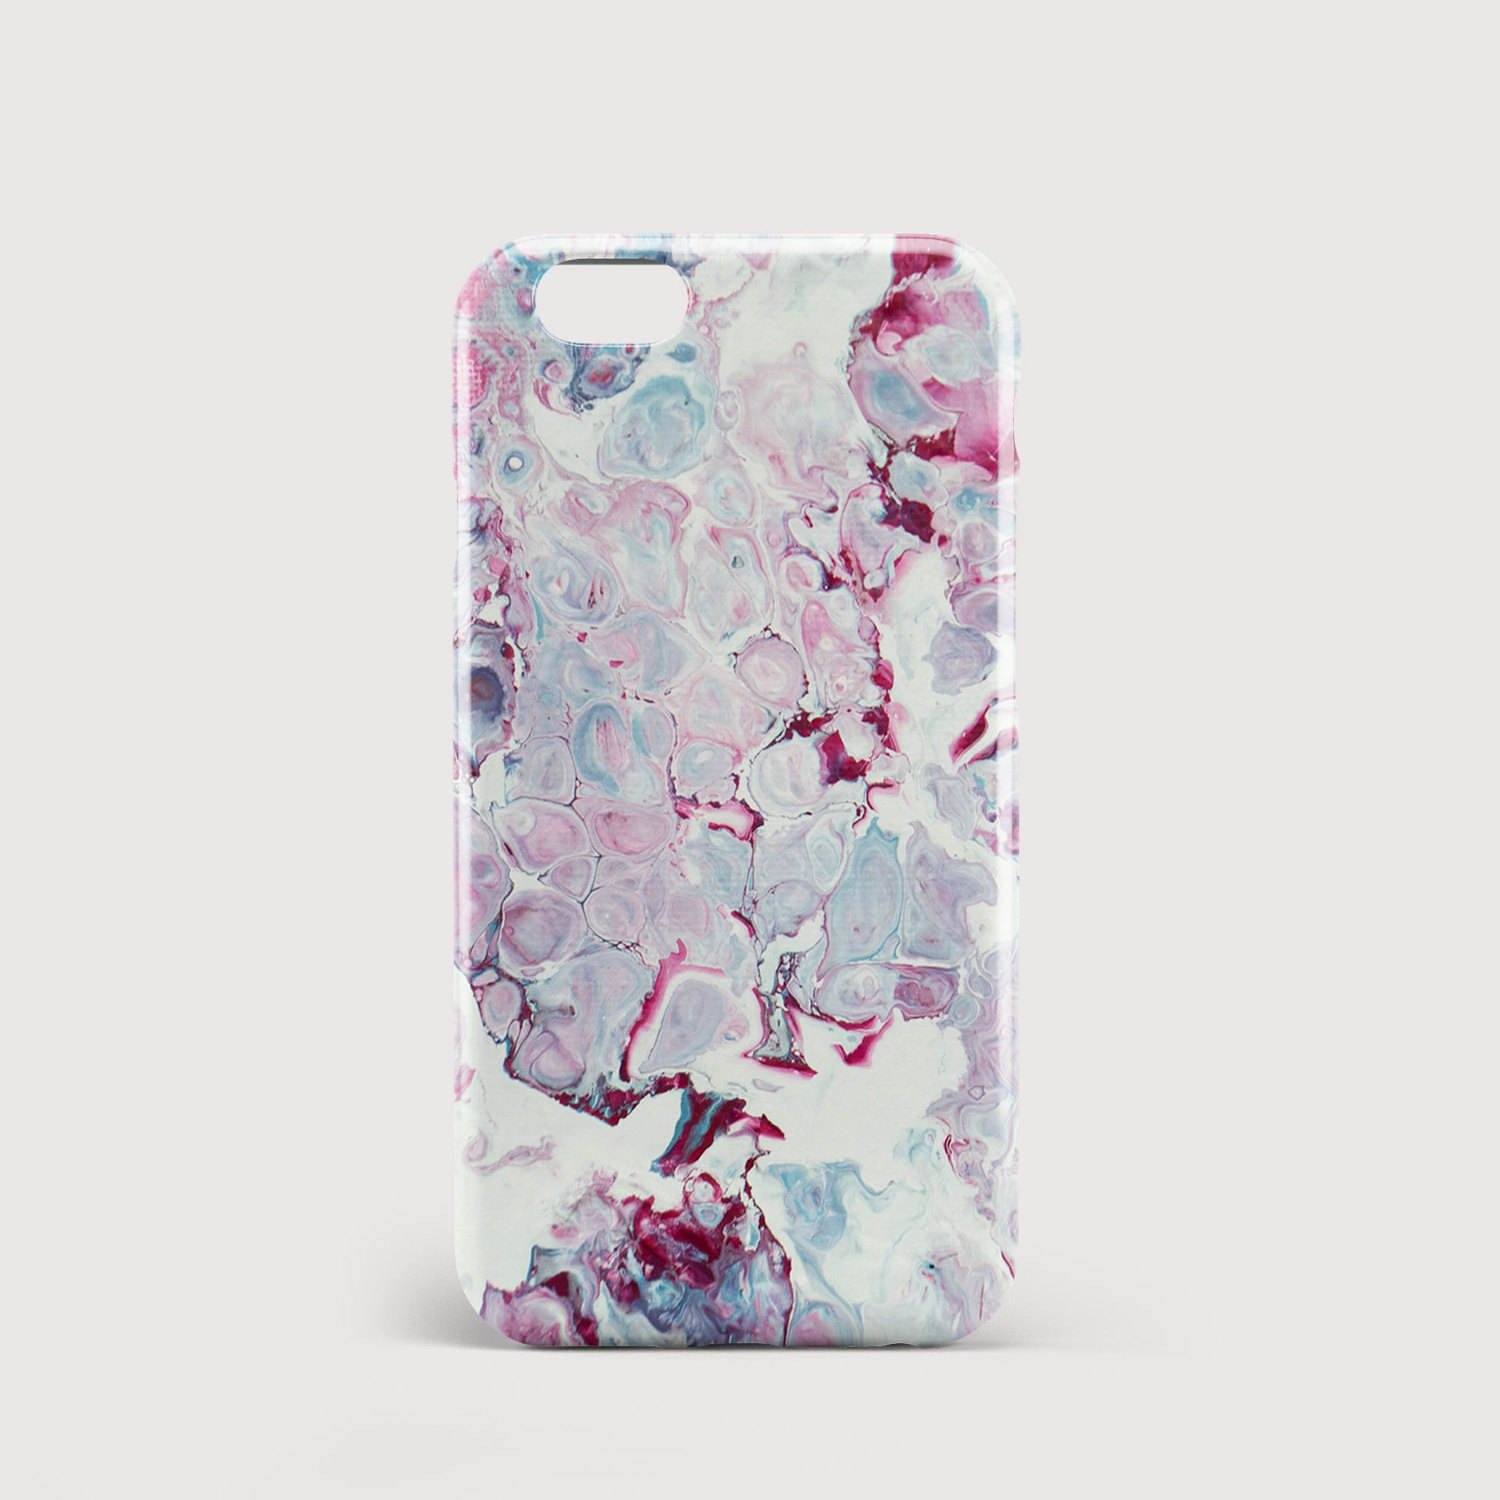 Little Pearls iPhone Case - Louise Mead